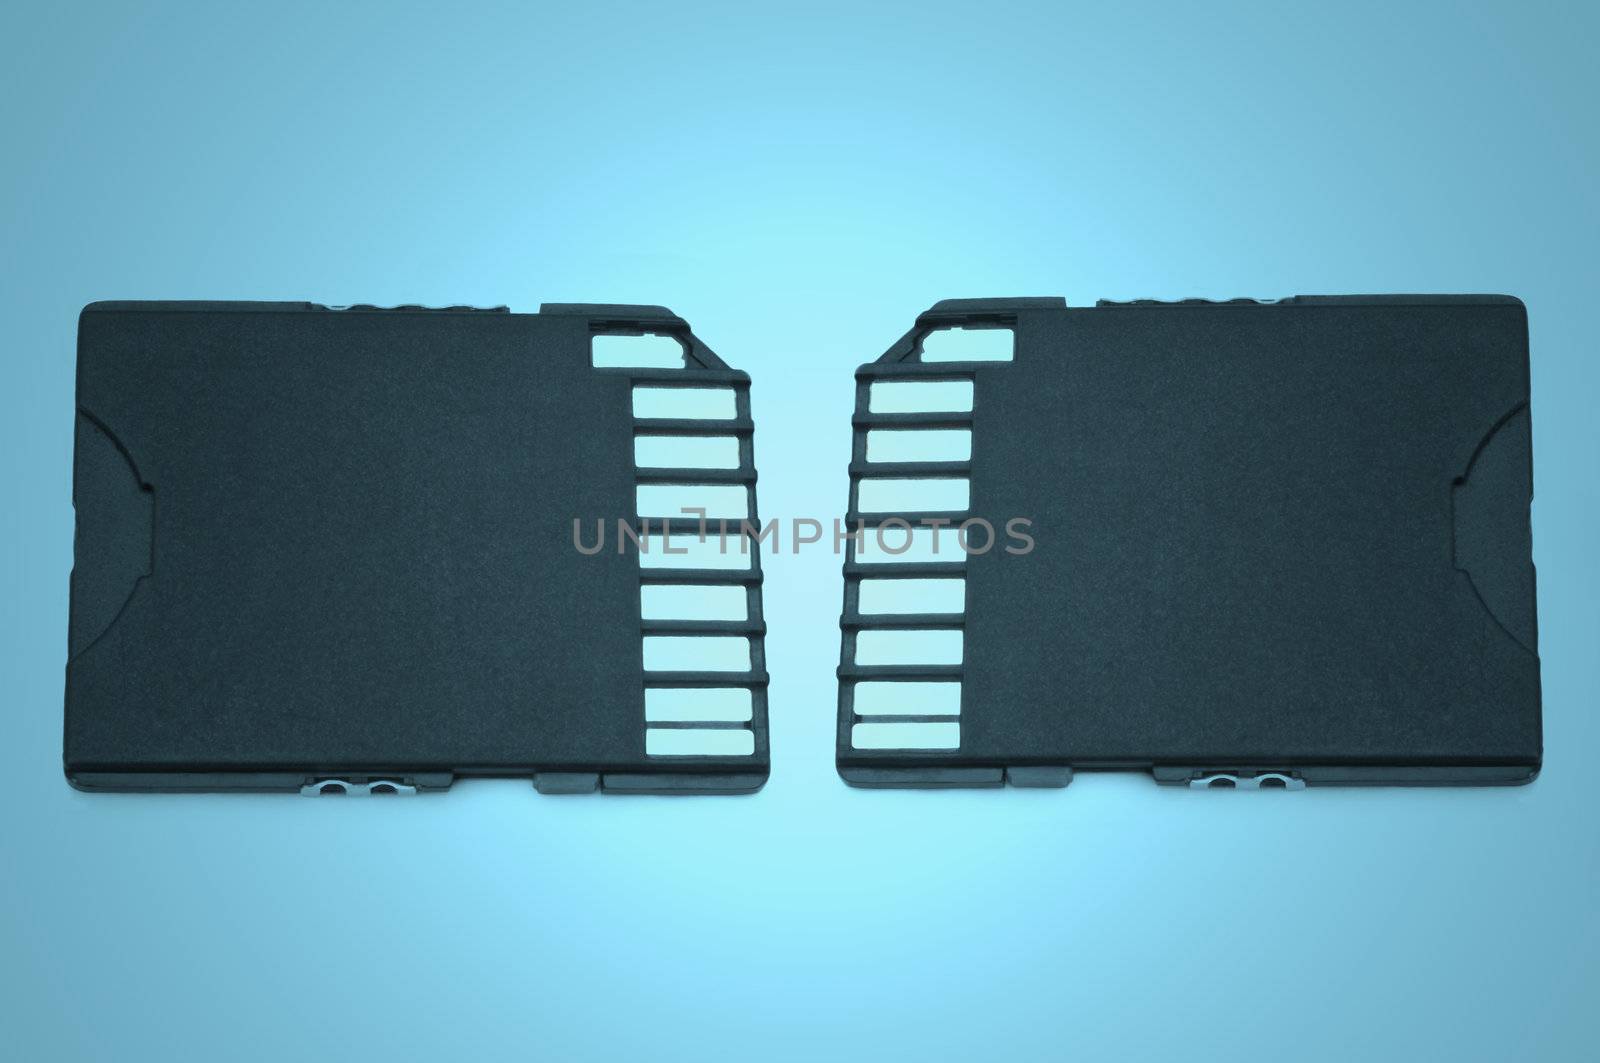 Close up on two black SD memory cards arranged over blue light filter